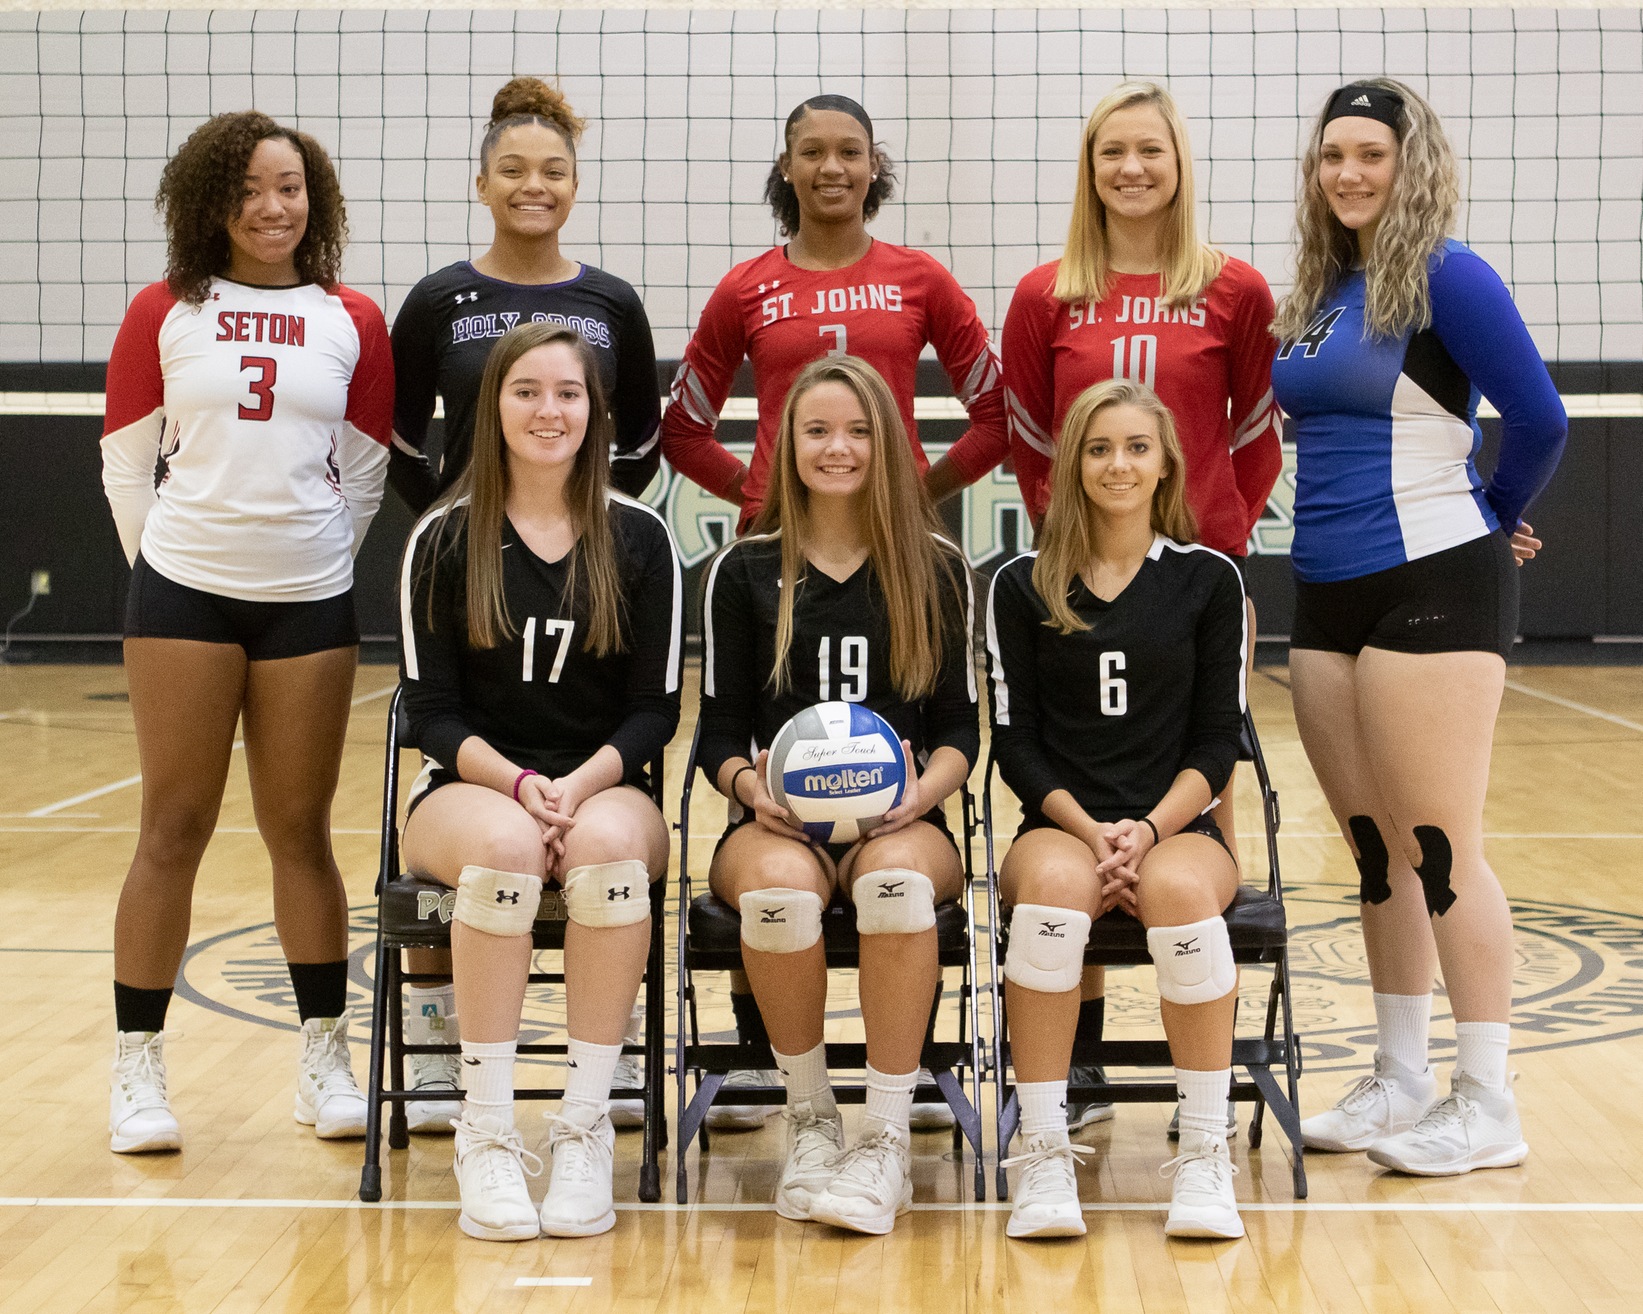 WCAC Announces 2018 Girl's Volleyball All Conference Teams